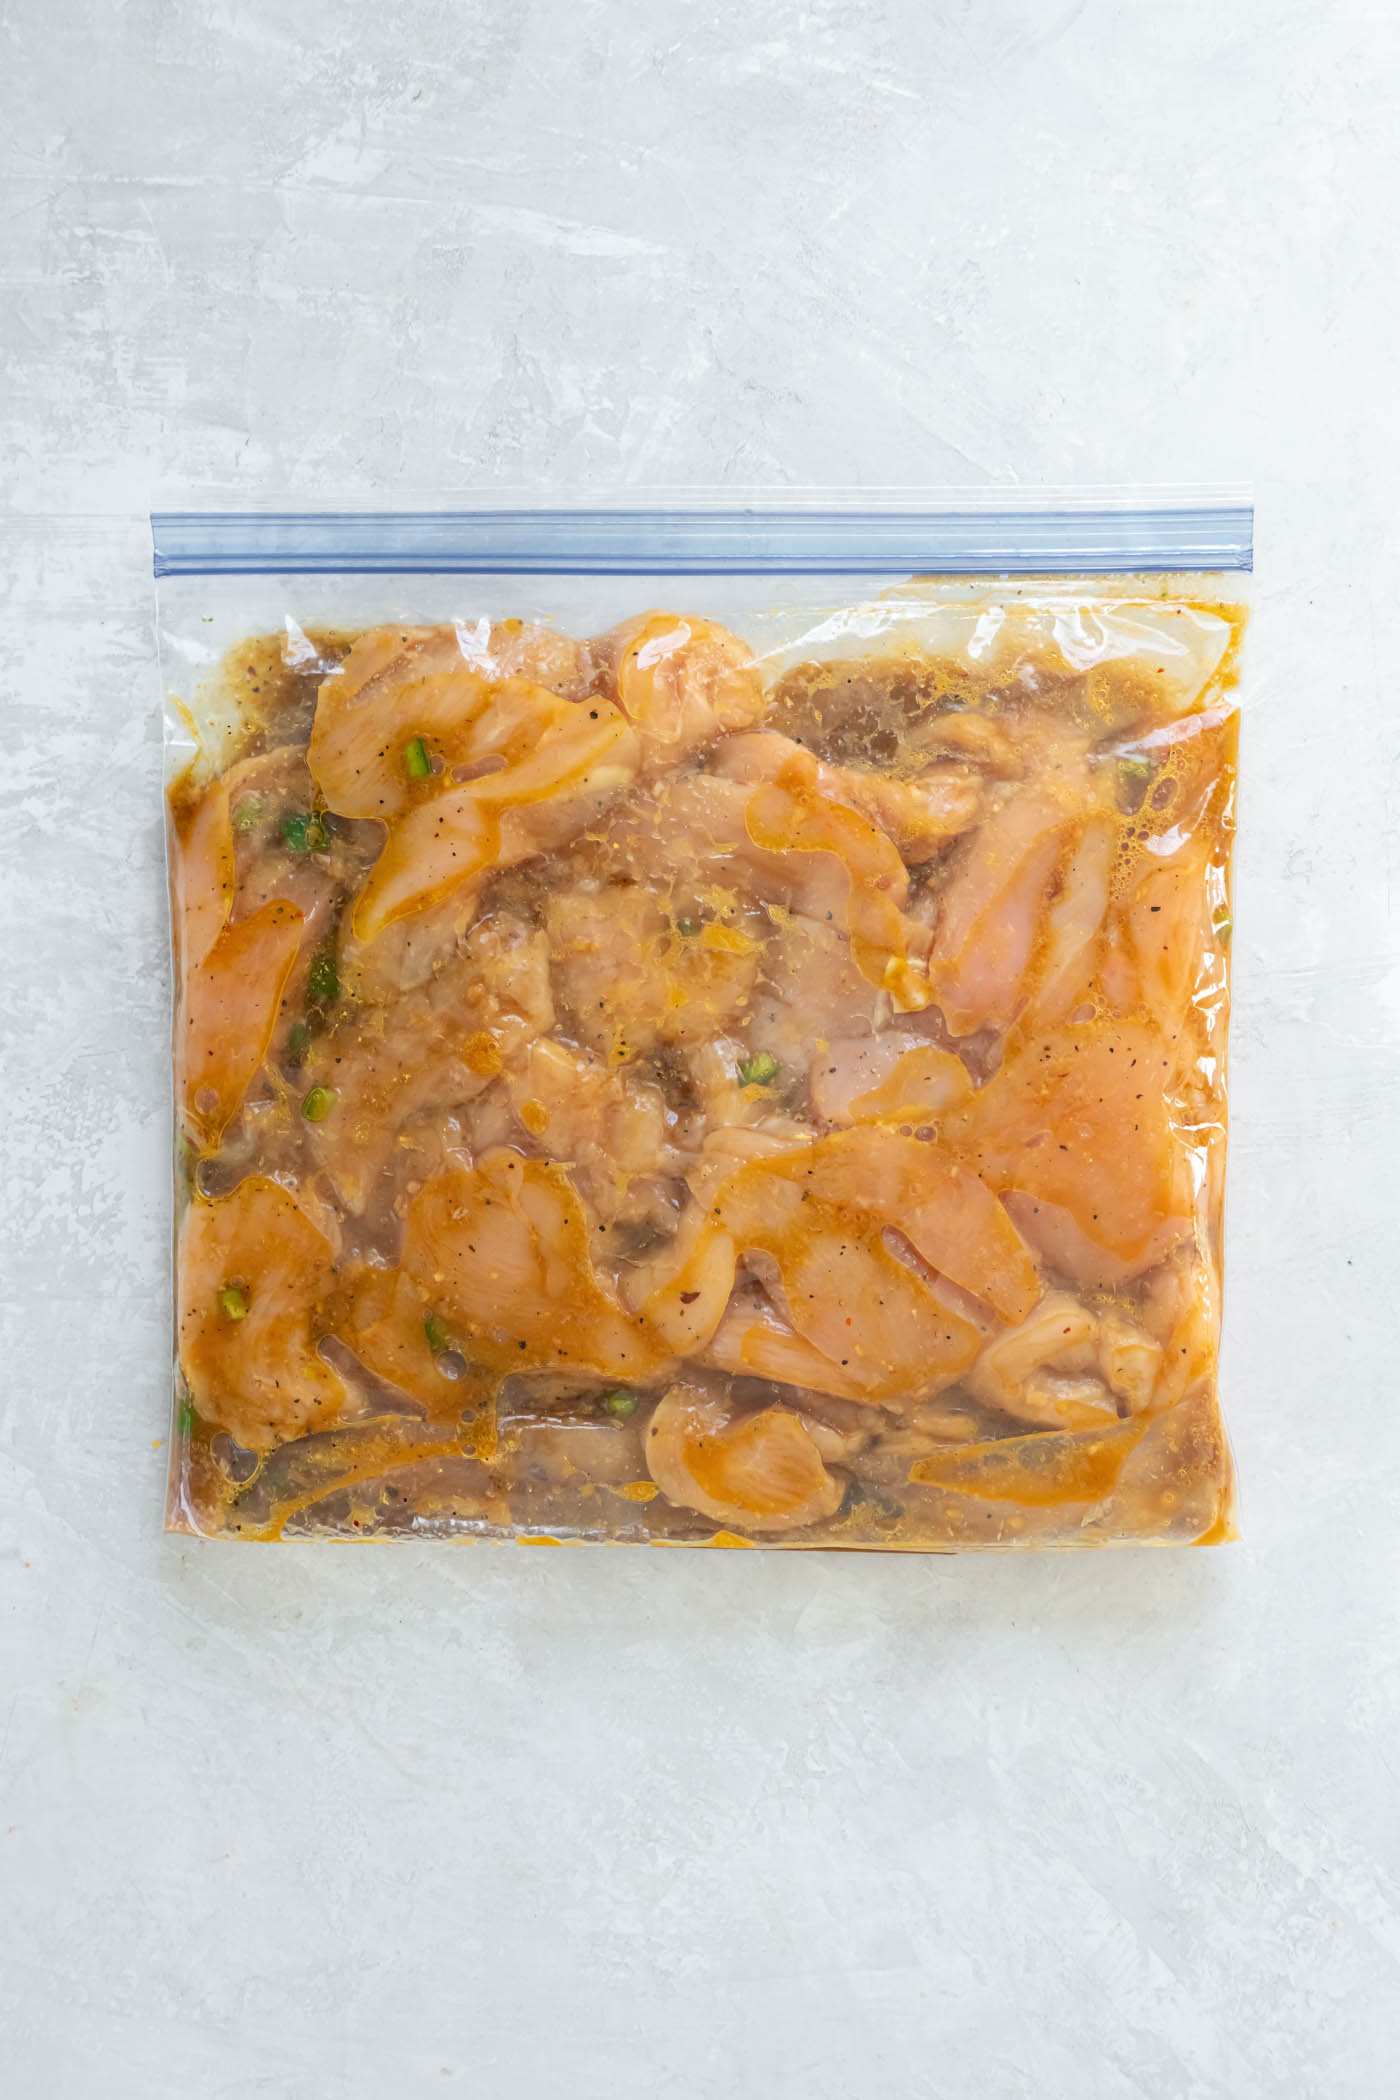 Sliced chicken breast and marinade in a sealed zip-top plastic bag.